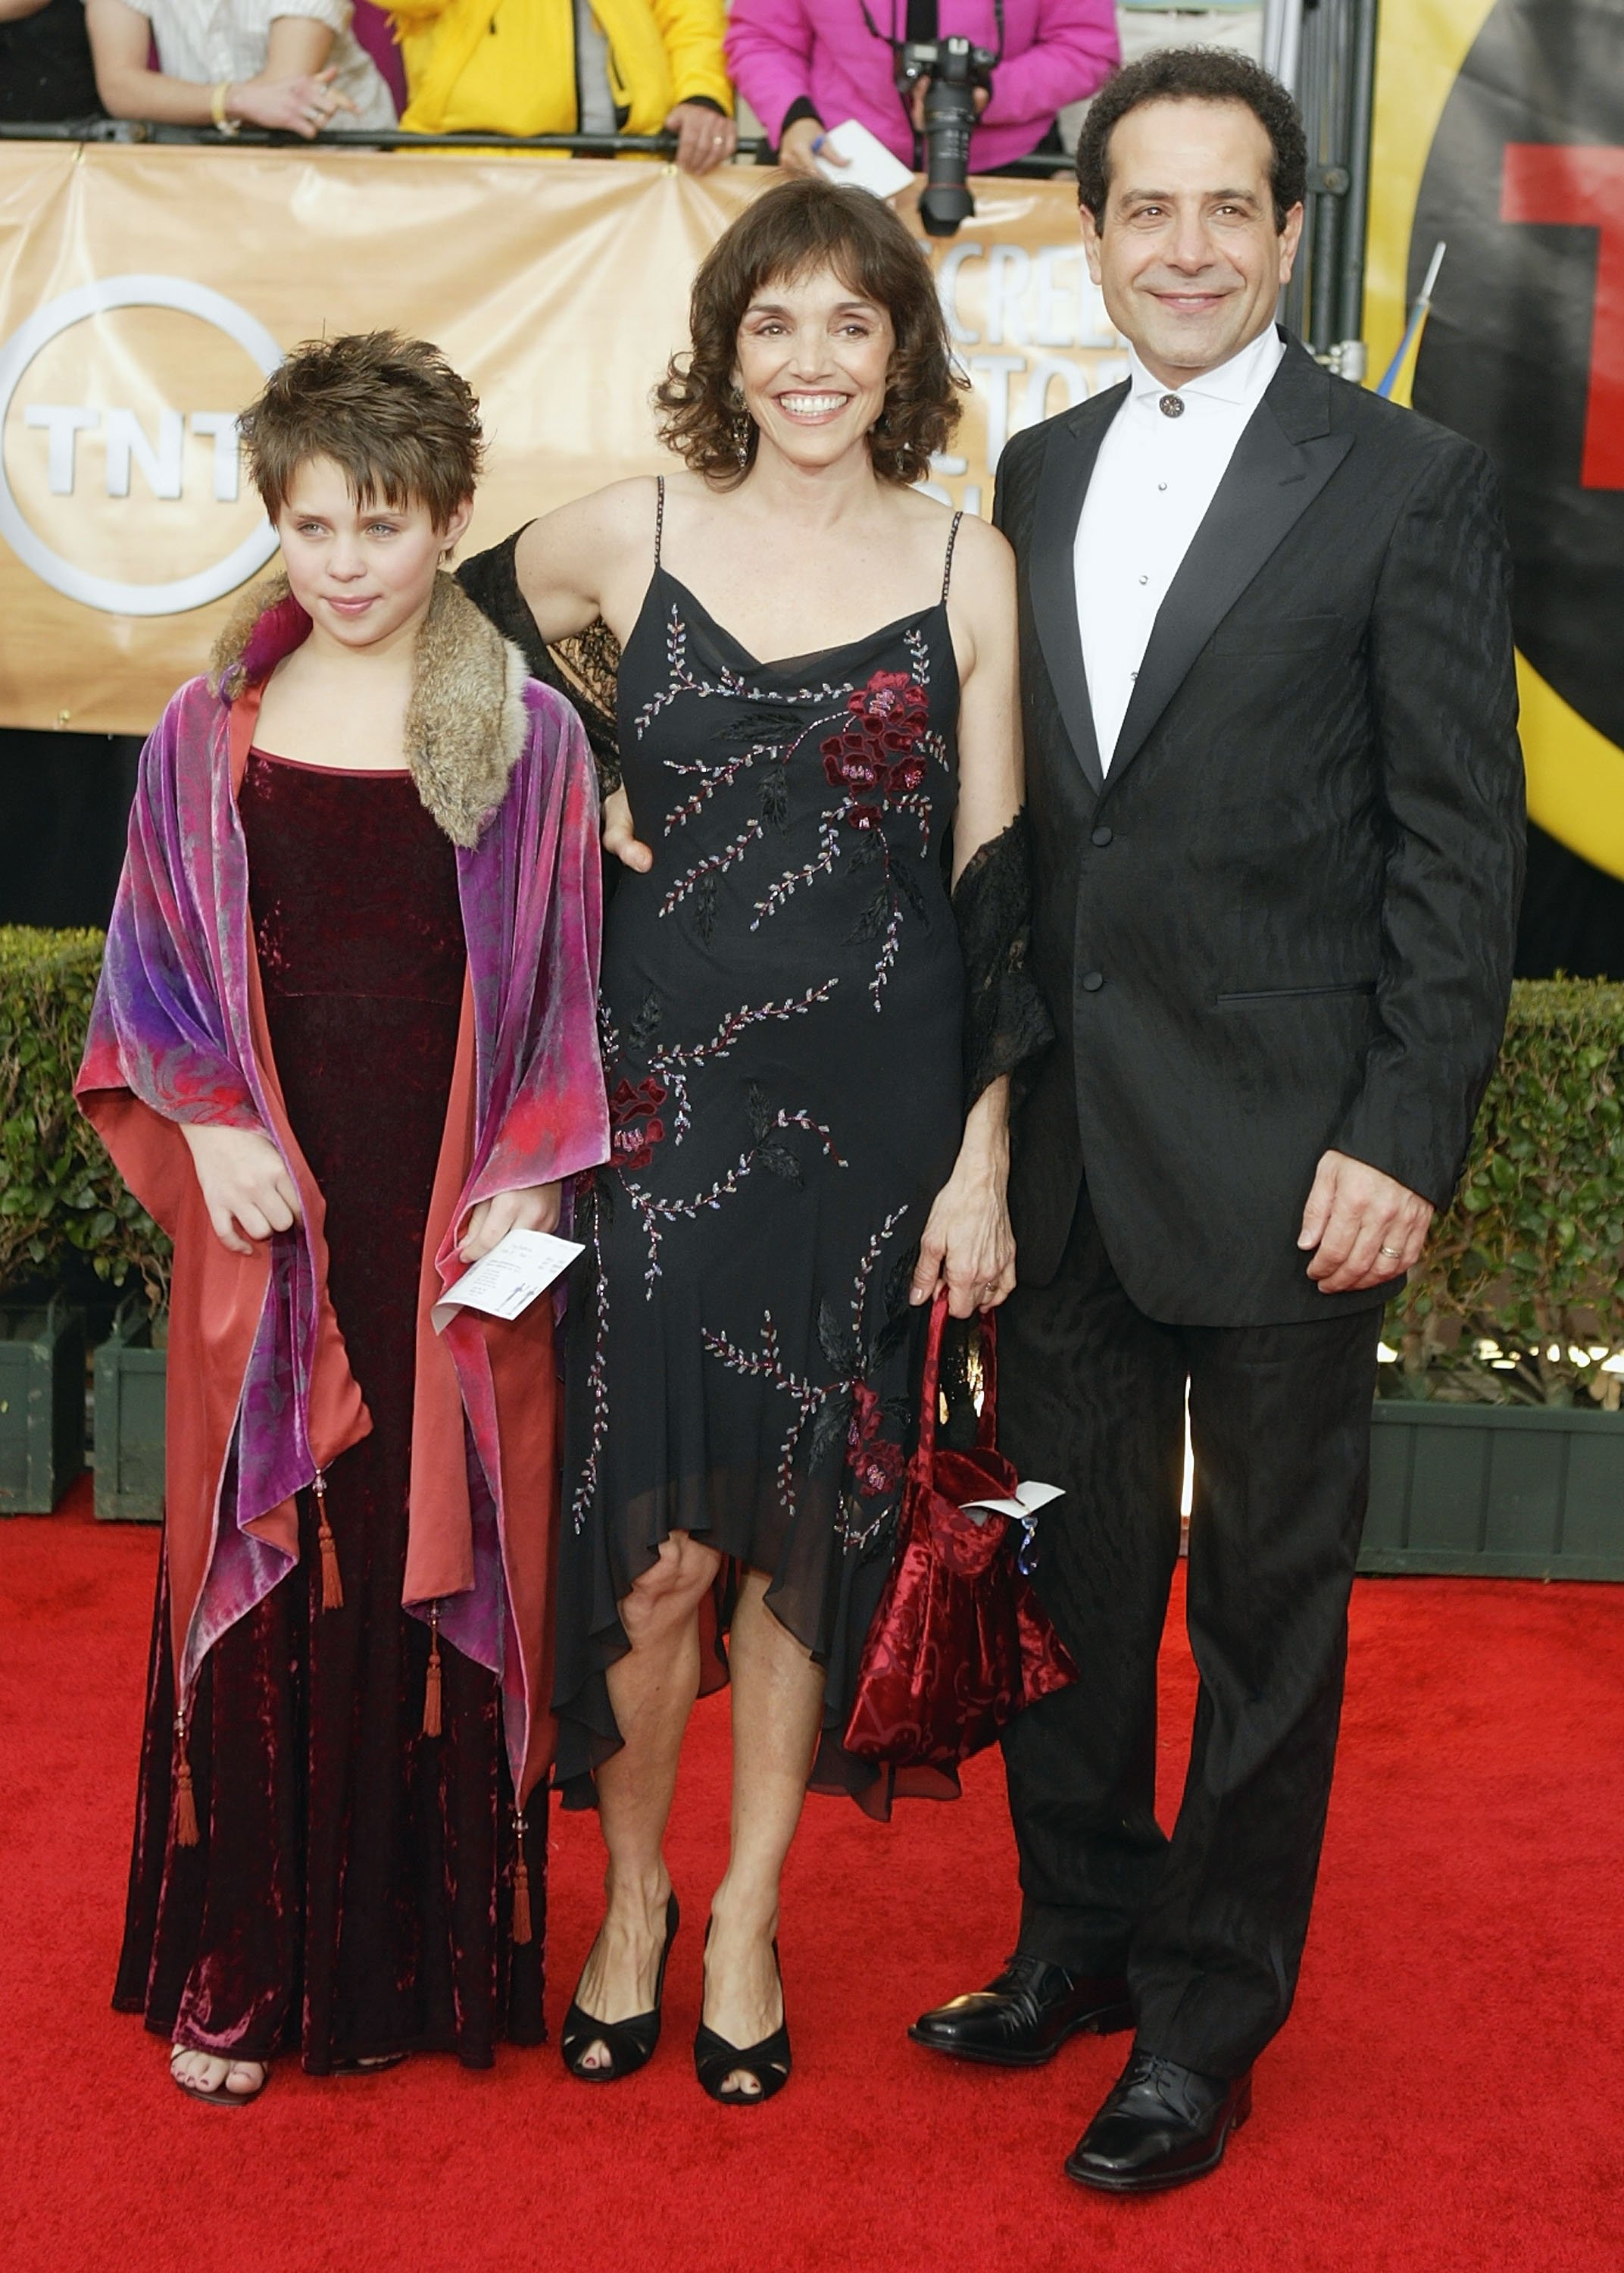 Tony Shalhoub with his wife Brooke Adams and their daughter Sophie attend the 10th Annual Screen Actors Guild Awards at the Shrine Auditorium on February 22, 2004 in Los Angeles, California. | Source: Getty Images